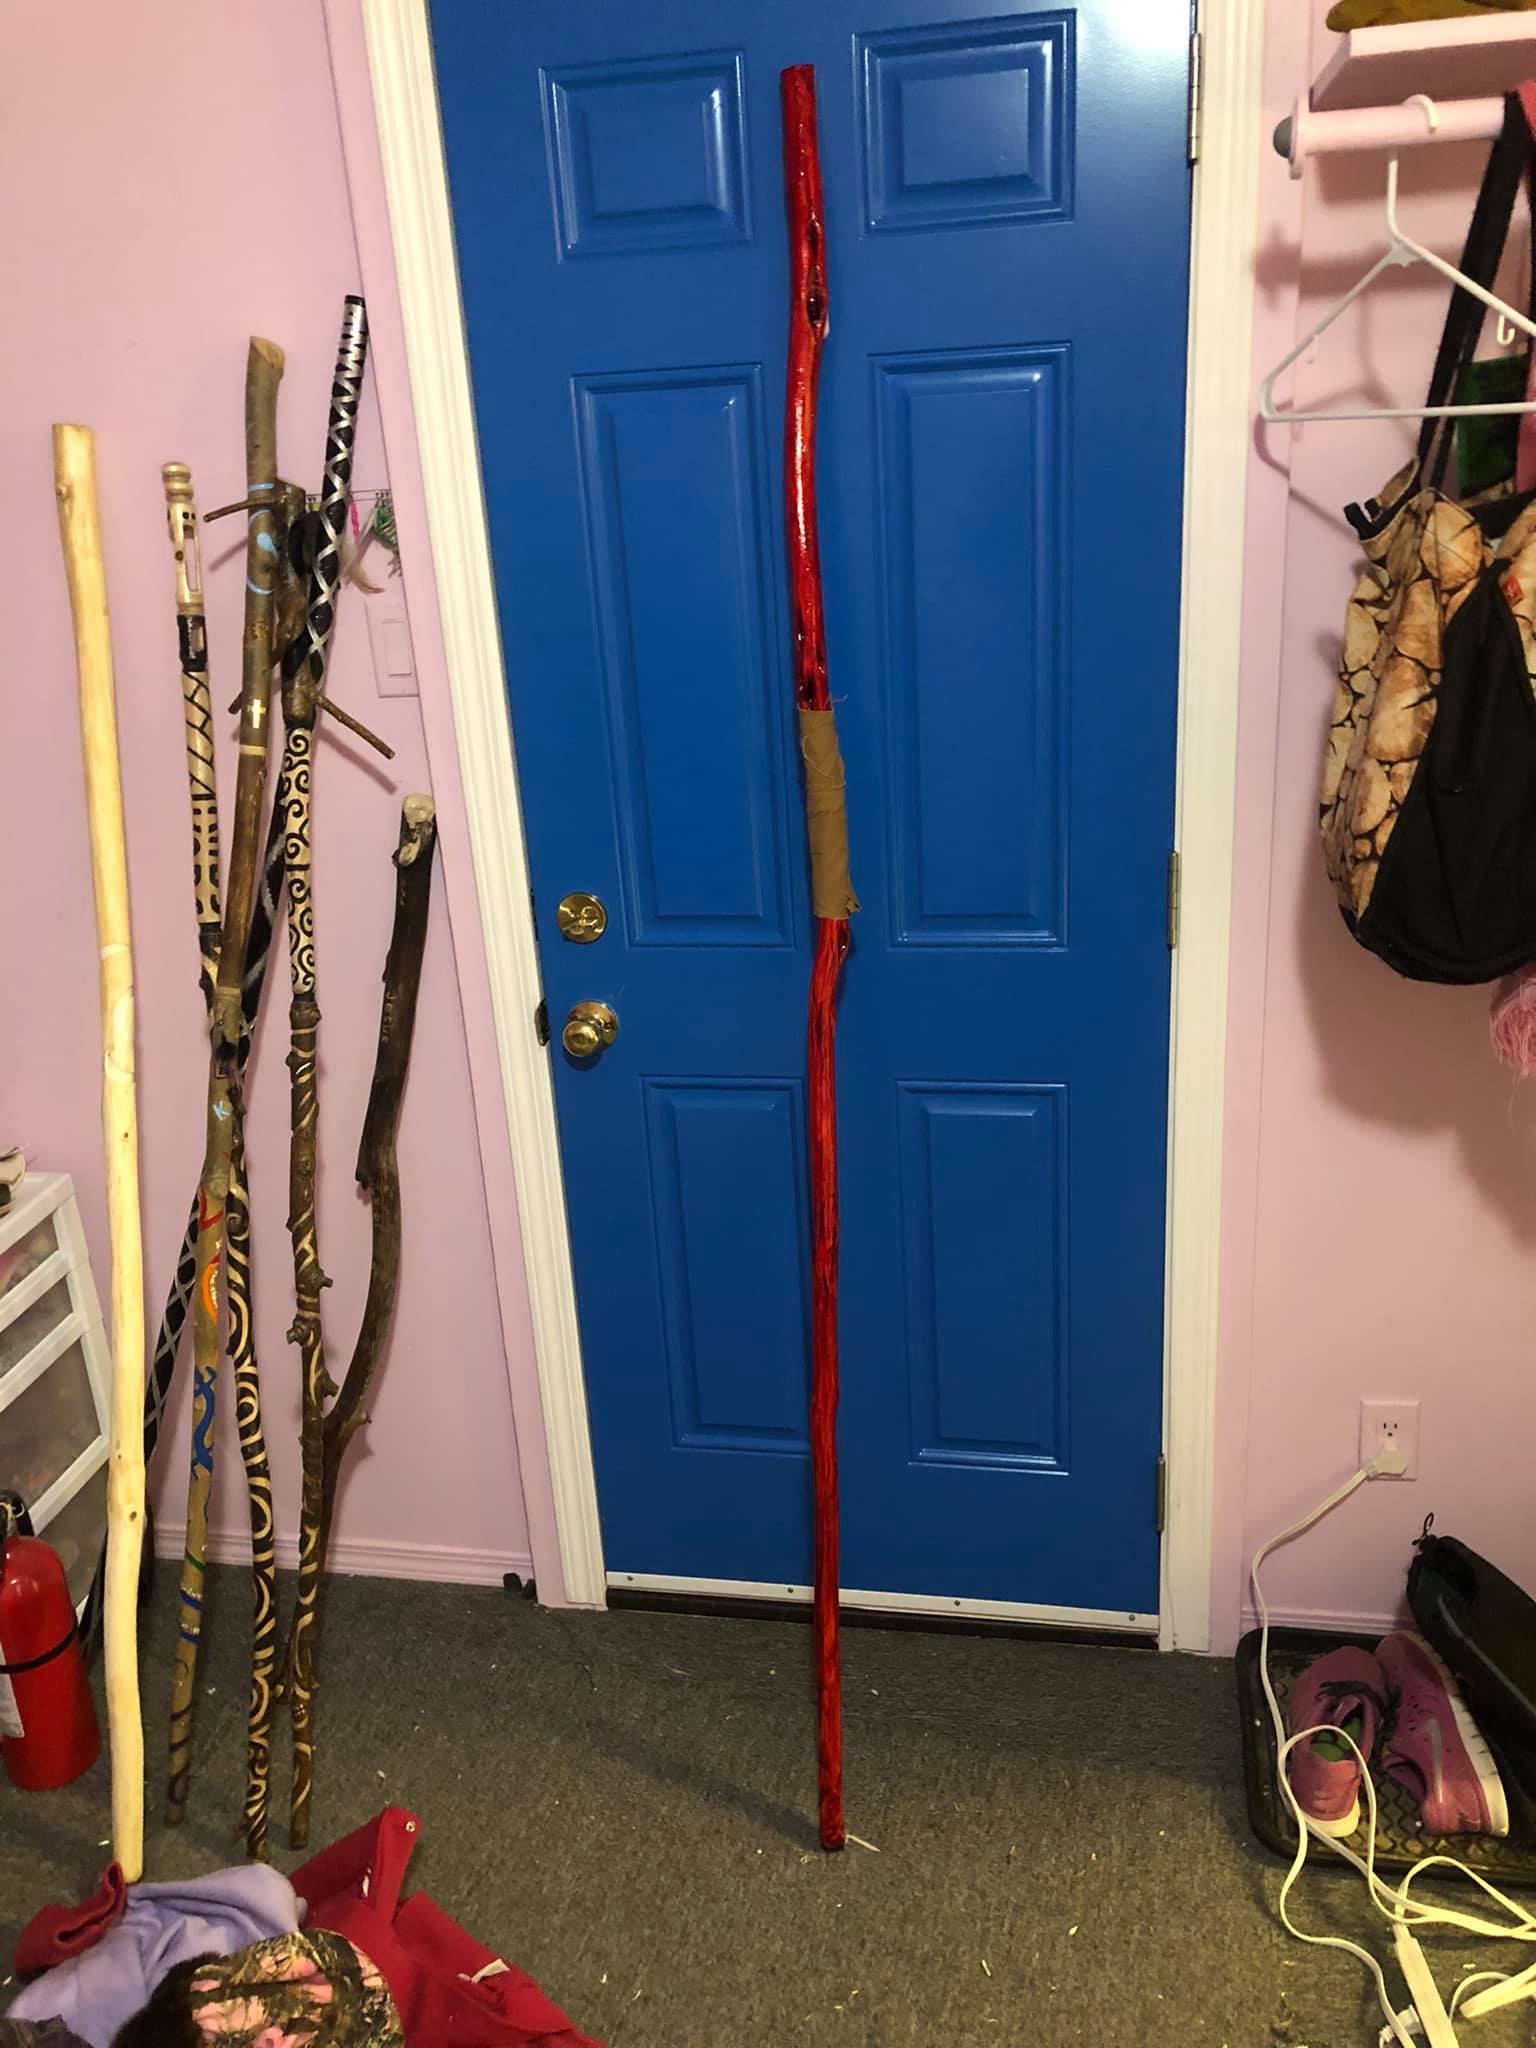 A photo of the staff of screaming, here labelled the blood staff, against the door of the apartment.